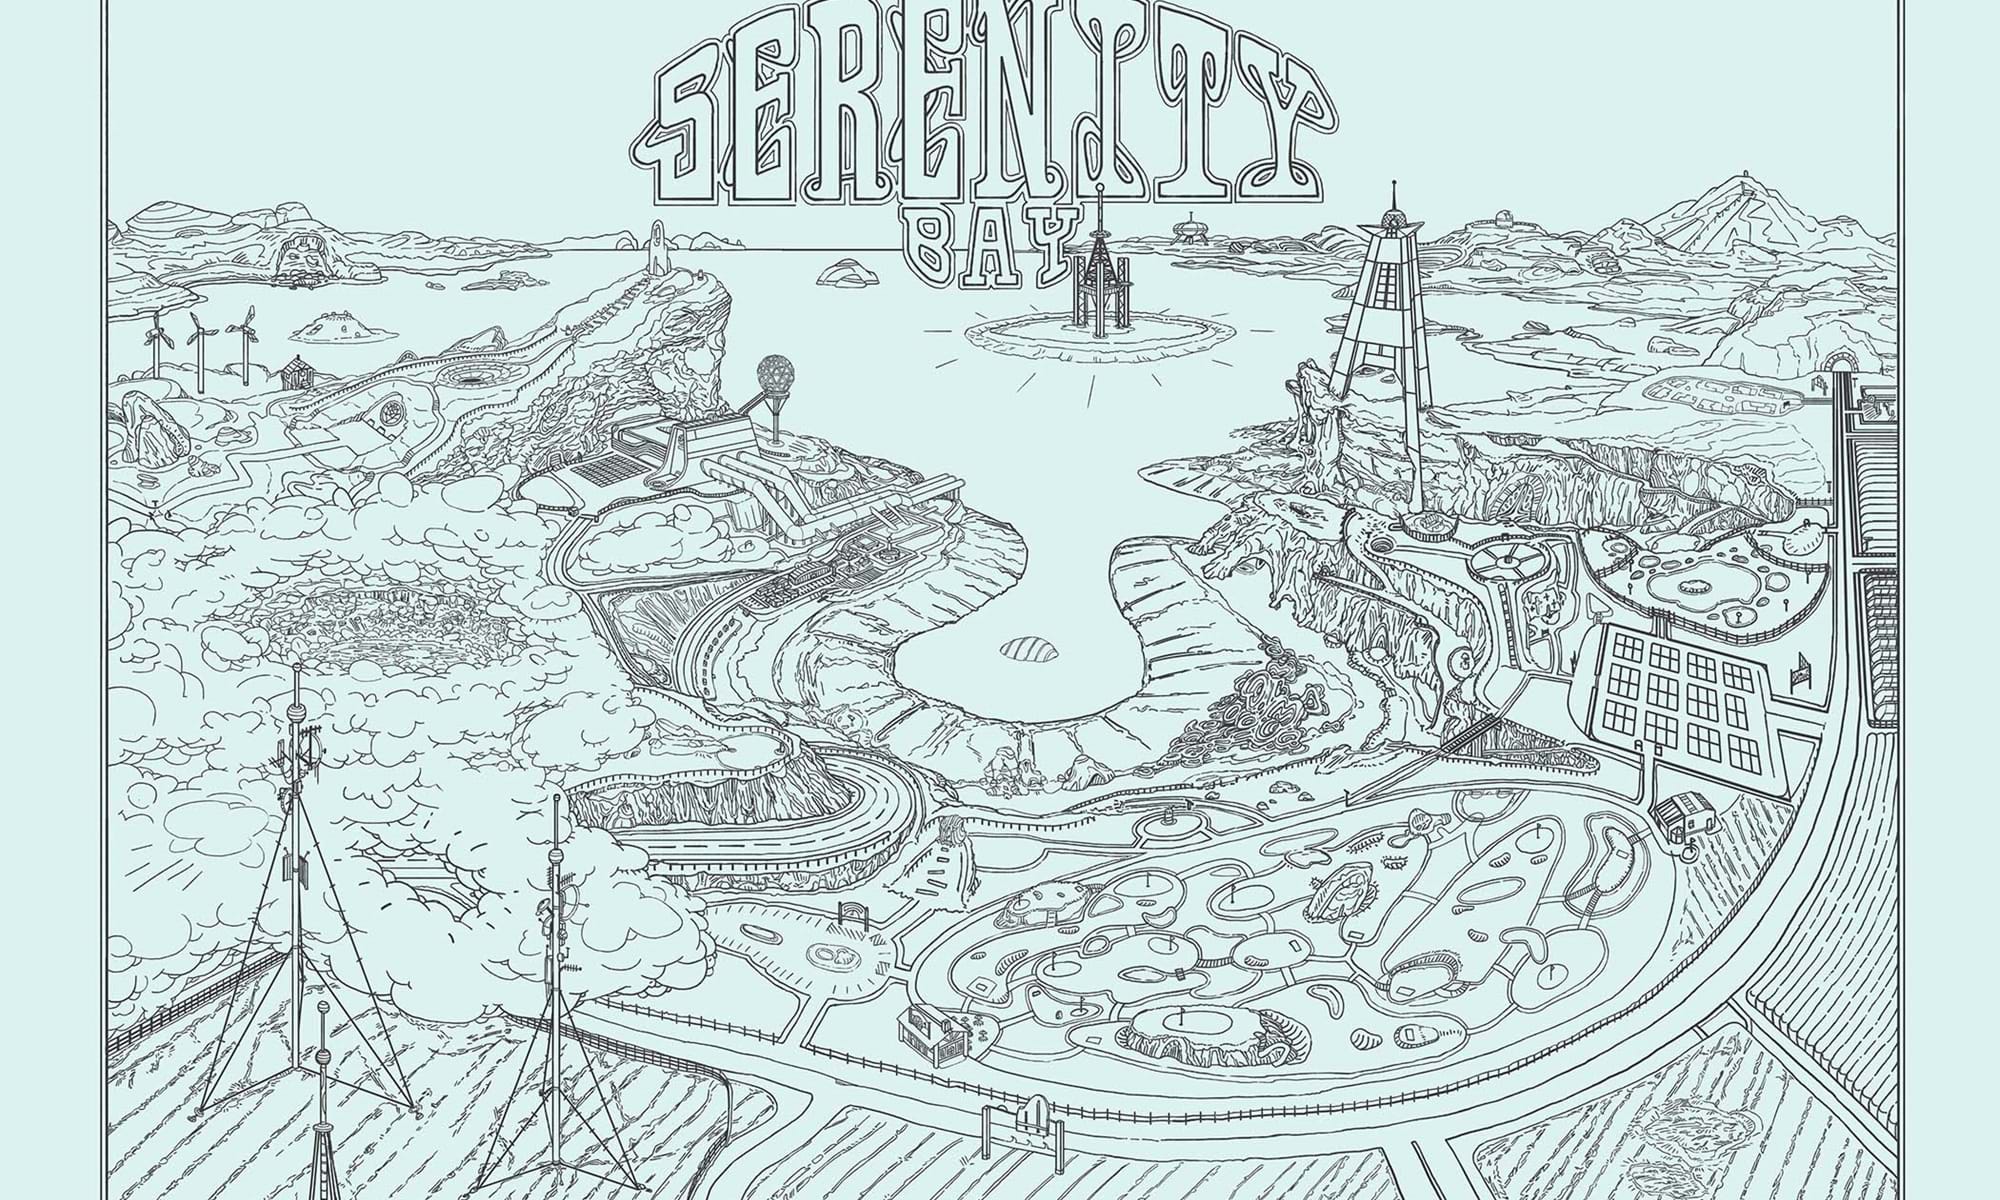 “Welcome to Serenity Bay” is a 2020 Digital Graduate Show project by MatthewJenkins, a student at Abertay University.